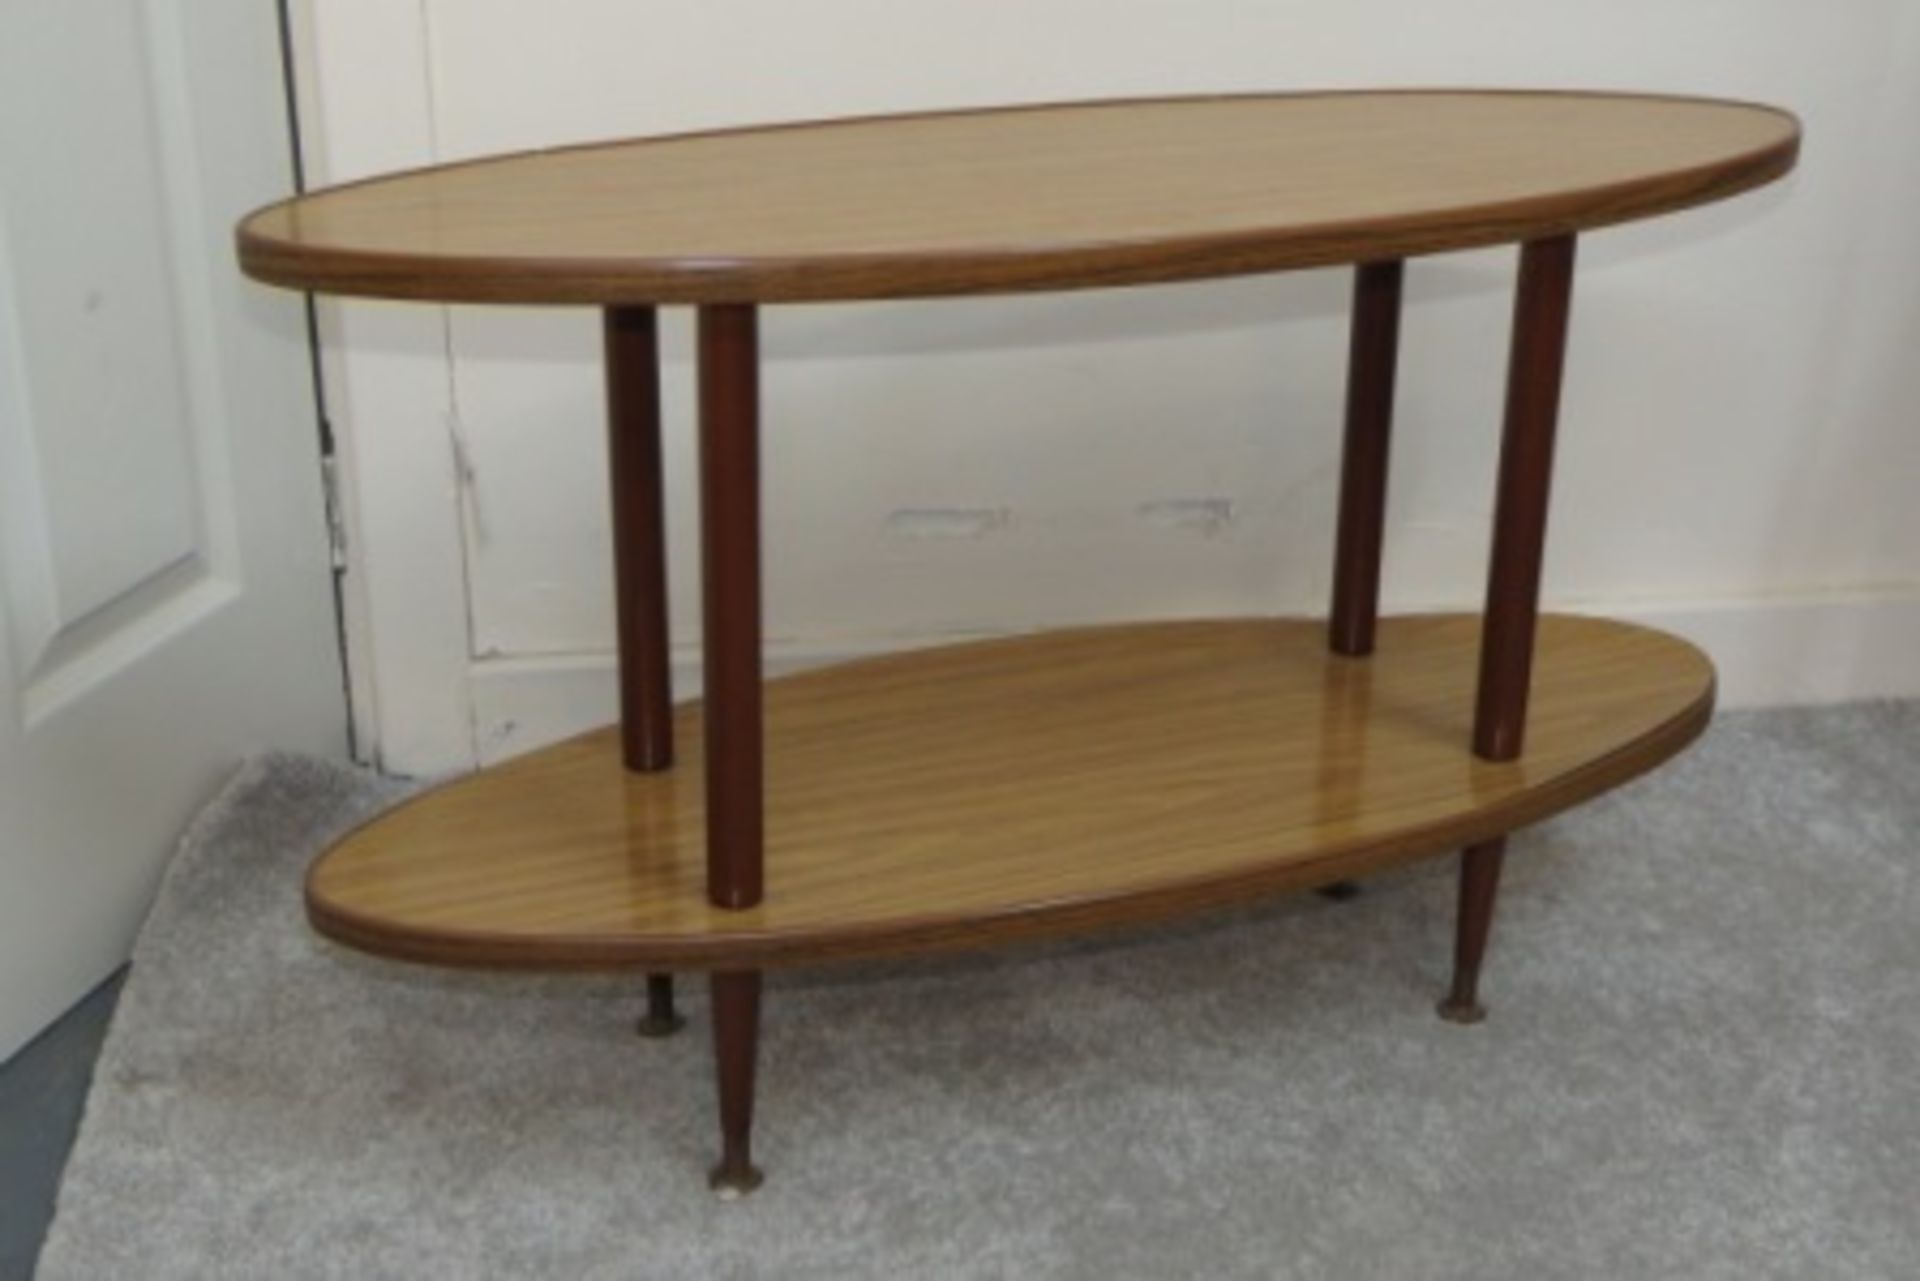 Retro 1950's Oval Two Tier Table